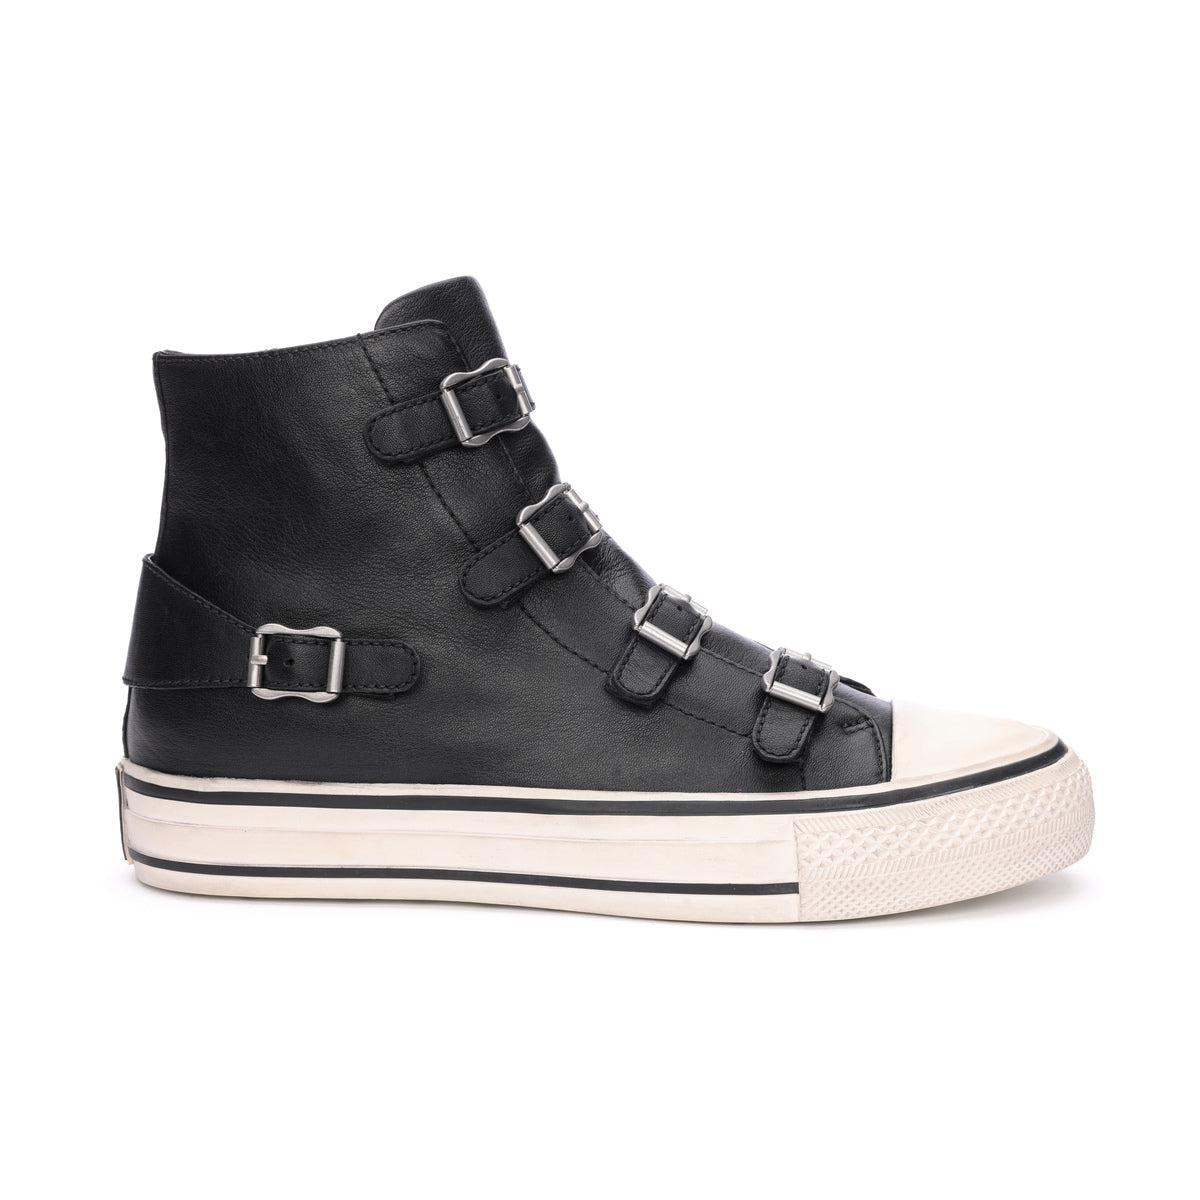 Virgin Leather High Top Sneakers With Buckles | ASH